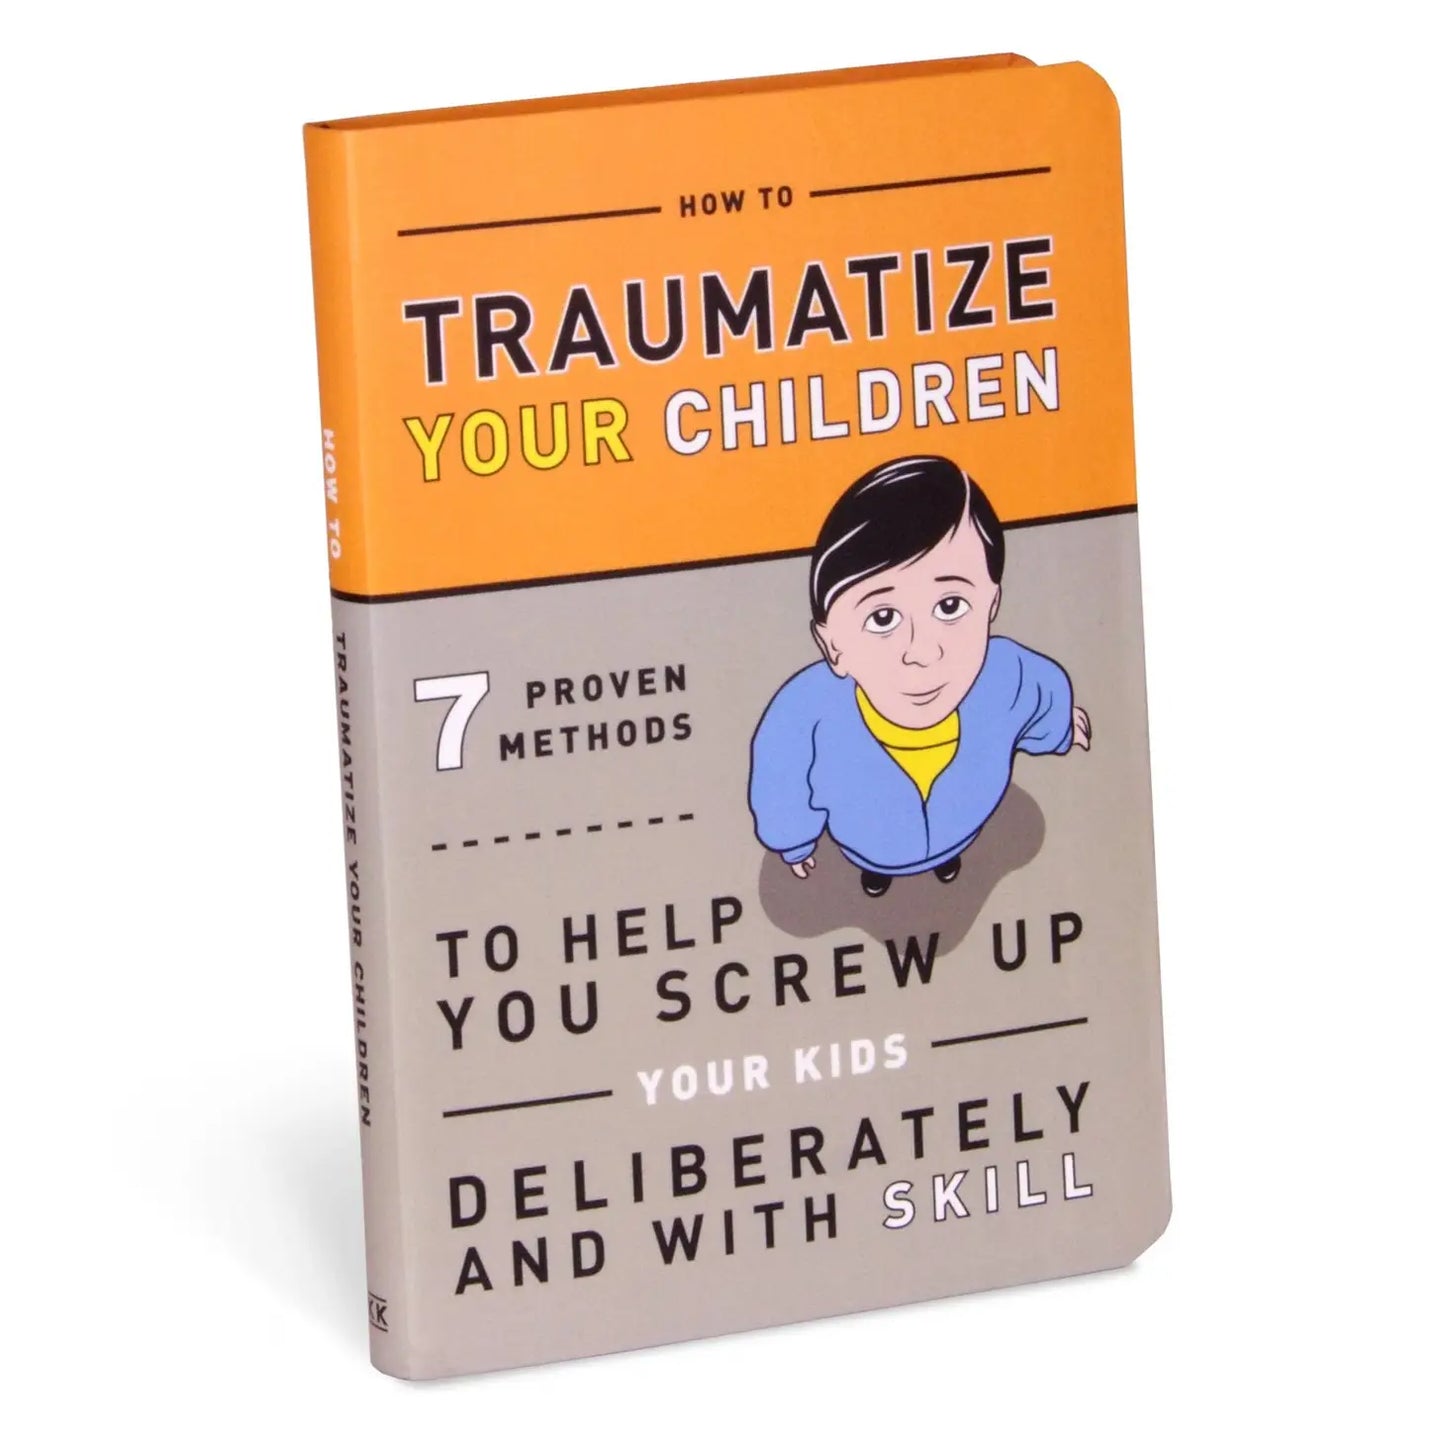 How To Traumatize Your Children: 7 Proven Methods To Help You Screw Up Your Kids Deliberately and with Skill Book - 144 pages